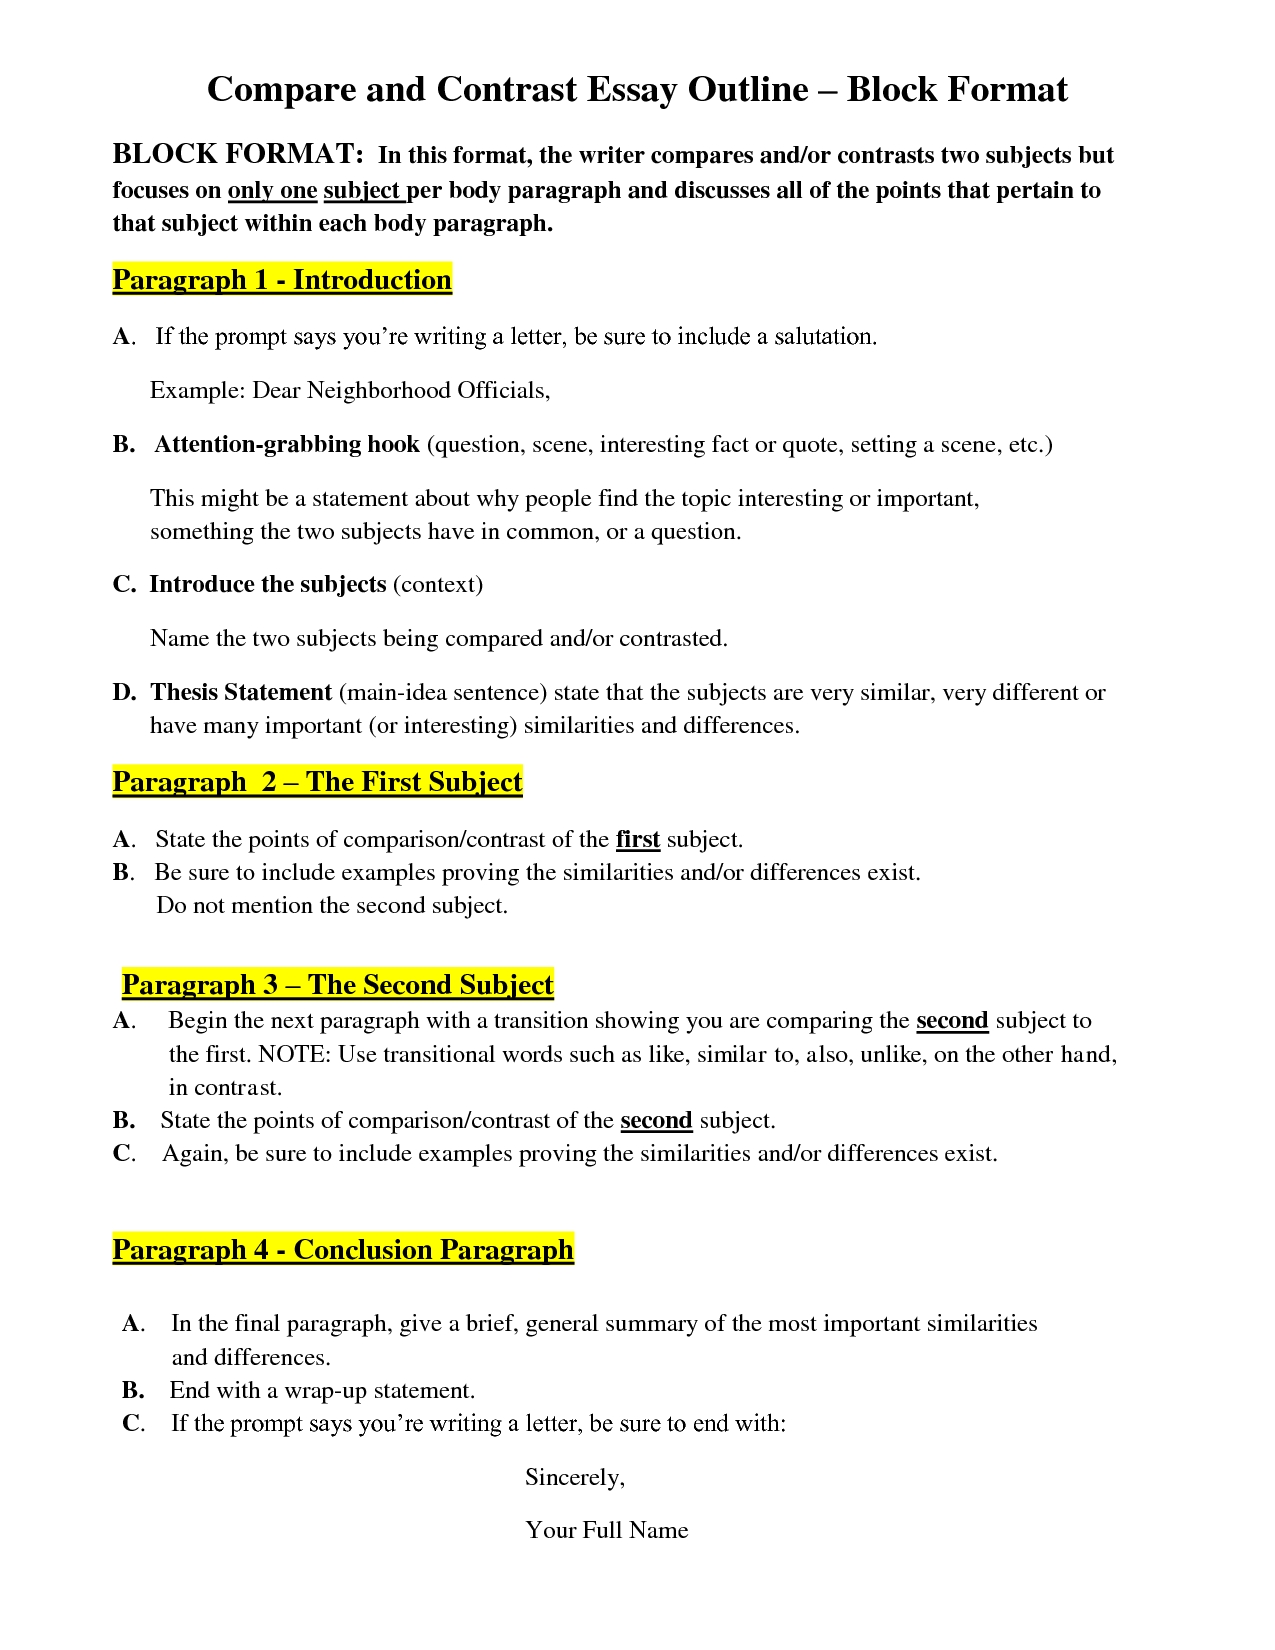 Thesis statement for compare and contrast essay